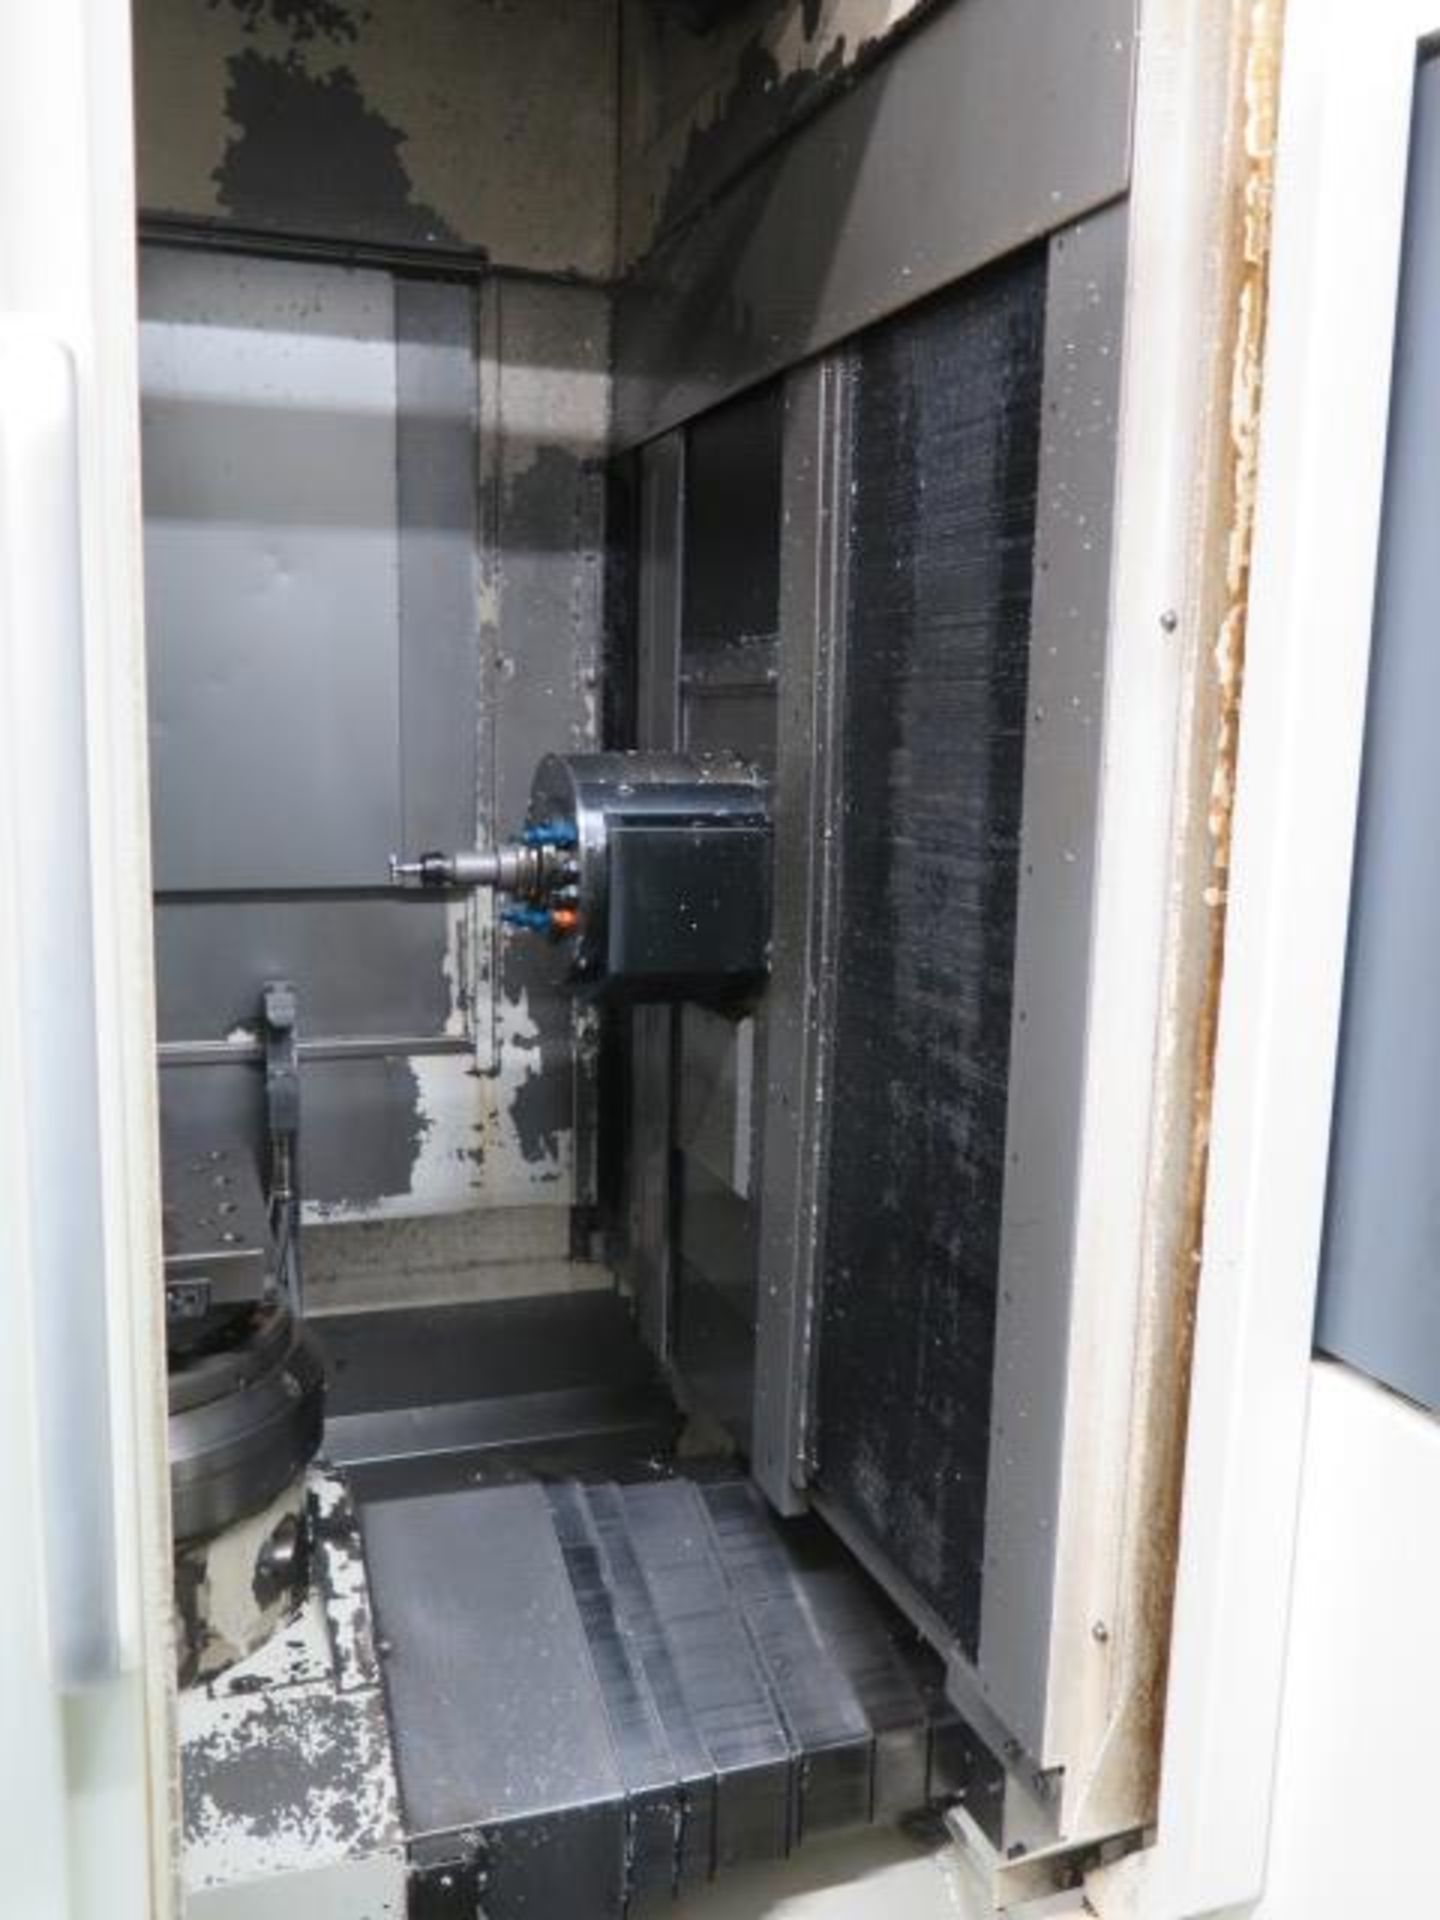 Kitamura Mycenter HX300iF 2-Paller 4-Axis CNC Horizontal Machining Center s/n 40975 SOLD AS IS - Image 4 of 26